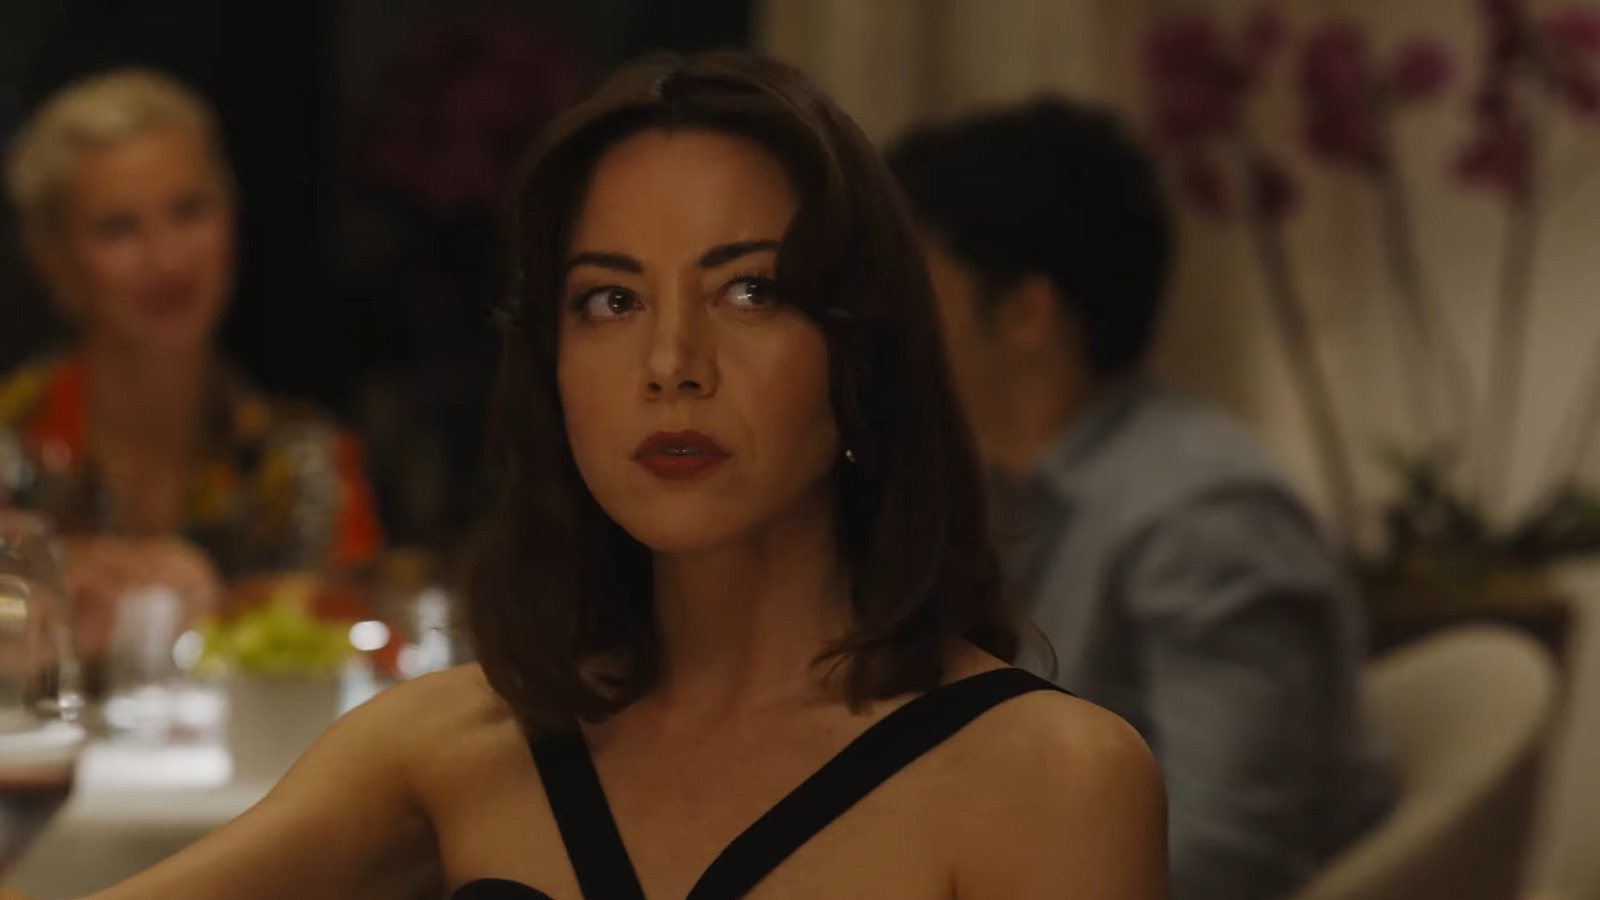 Watch: Aubrey Plaza shares her 'fantasy' ending for 'White Lotus